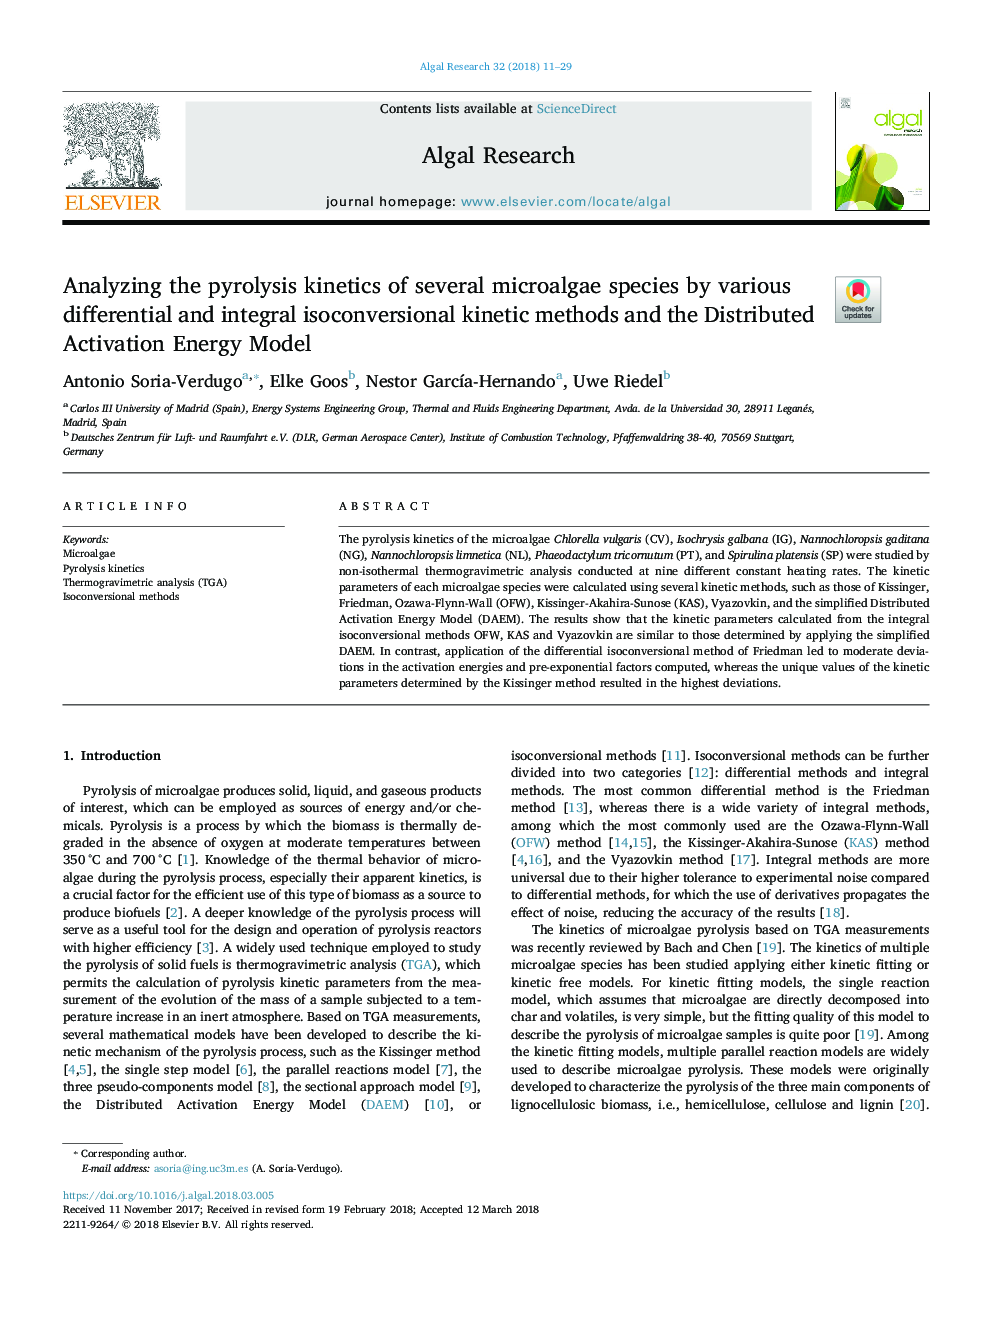 Analyzing the pyrolysis kinetics of several microalgae species by various differential and integral isoconversional kinetic methods and the Distributed Activation Energy Model